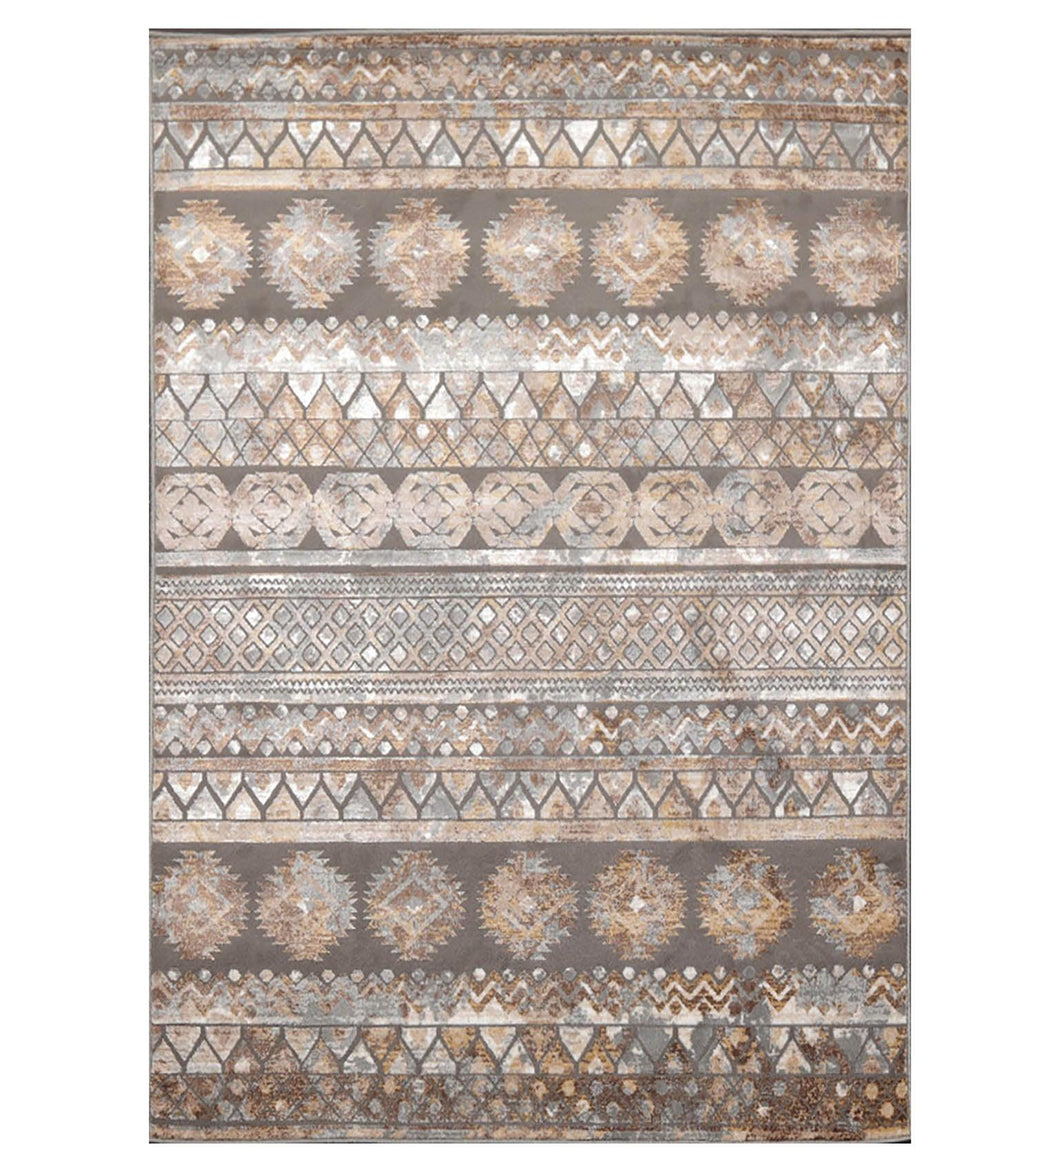   Gray Beige Silver Color Machine Made Persian  Southwestern Oriental Rug